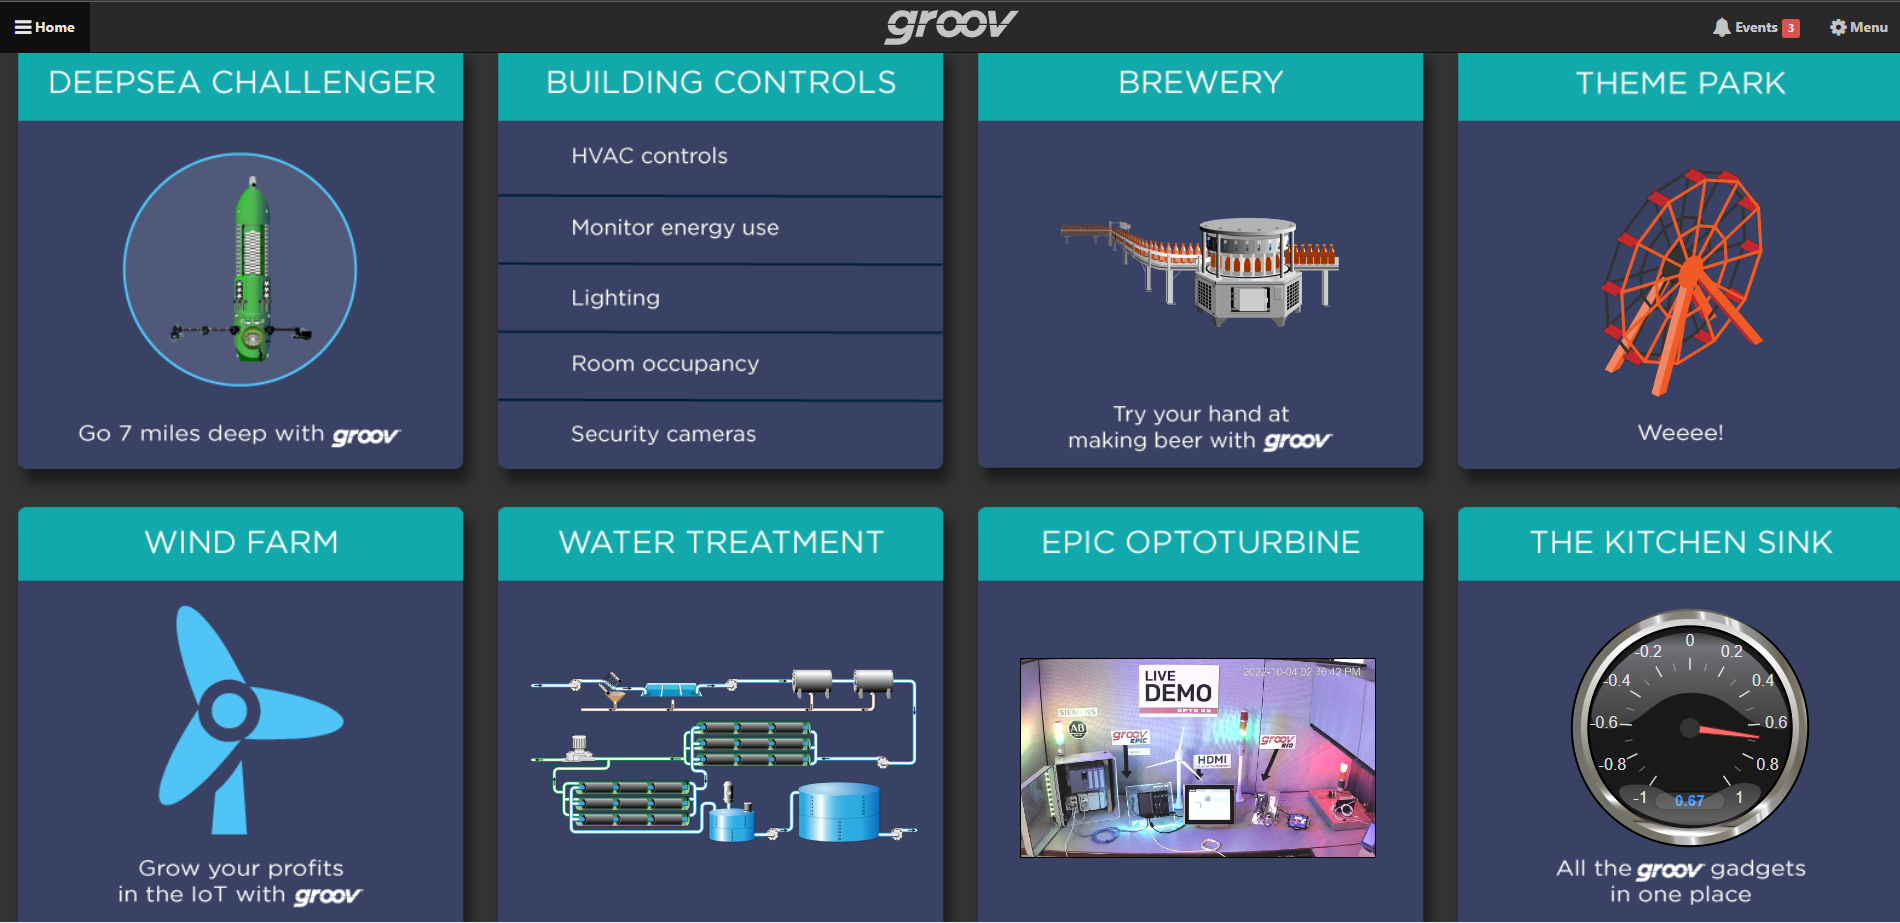 groov DEMO home page